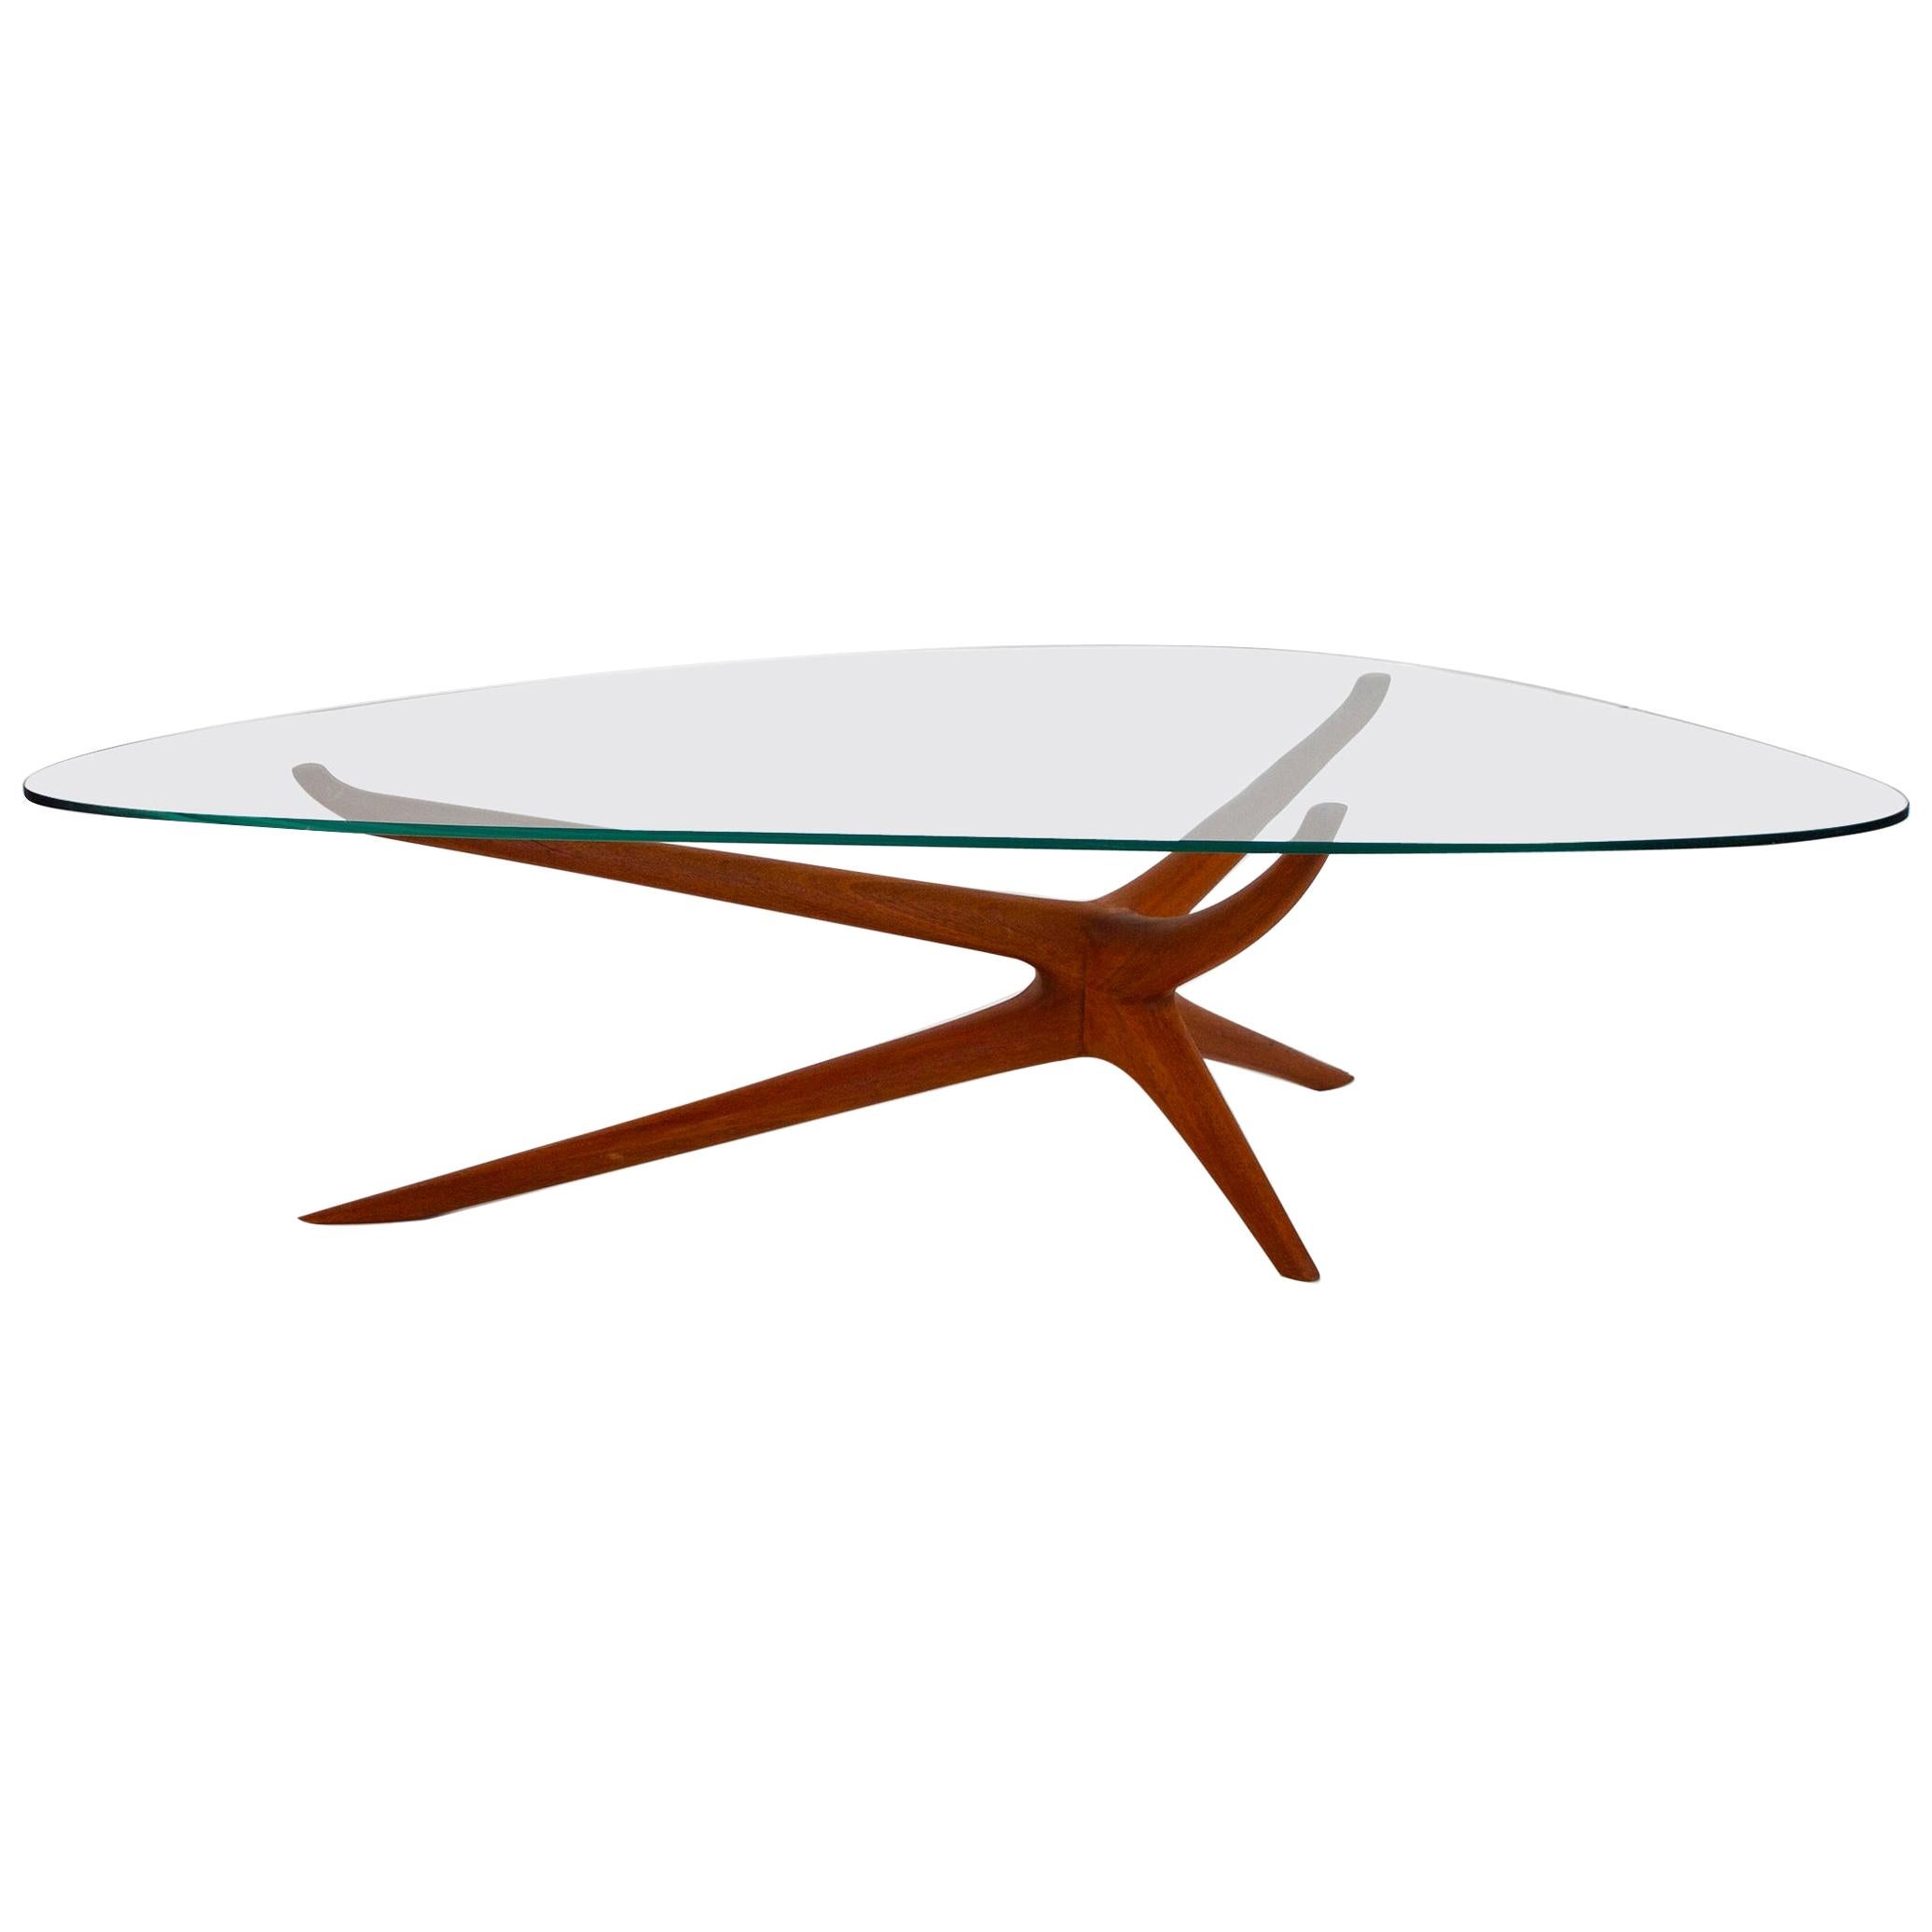 Mid-Century Modern Tri-Symmetric Organic Coffee Table in Mahogany with Glass Top For Sale